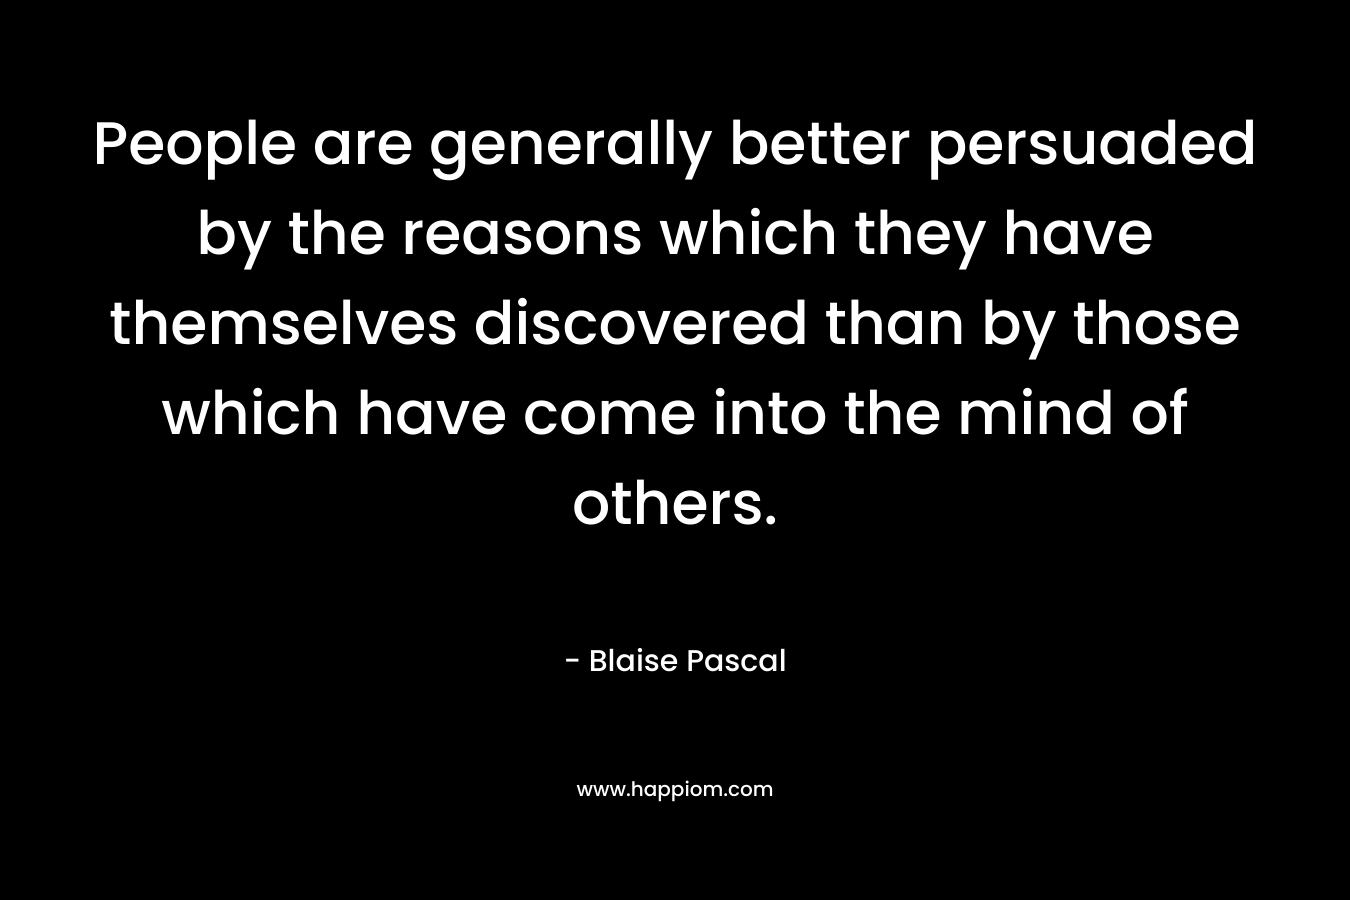 People are generally better persuaded by the reasons which they have themselves discovered than by those which have come into the mind of others. – Blaise Pascal